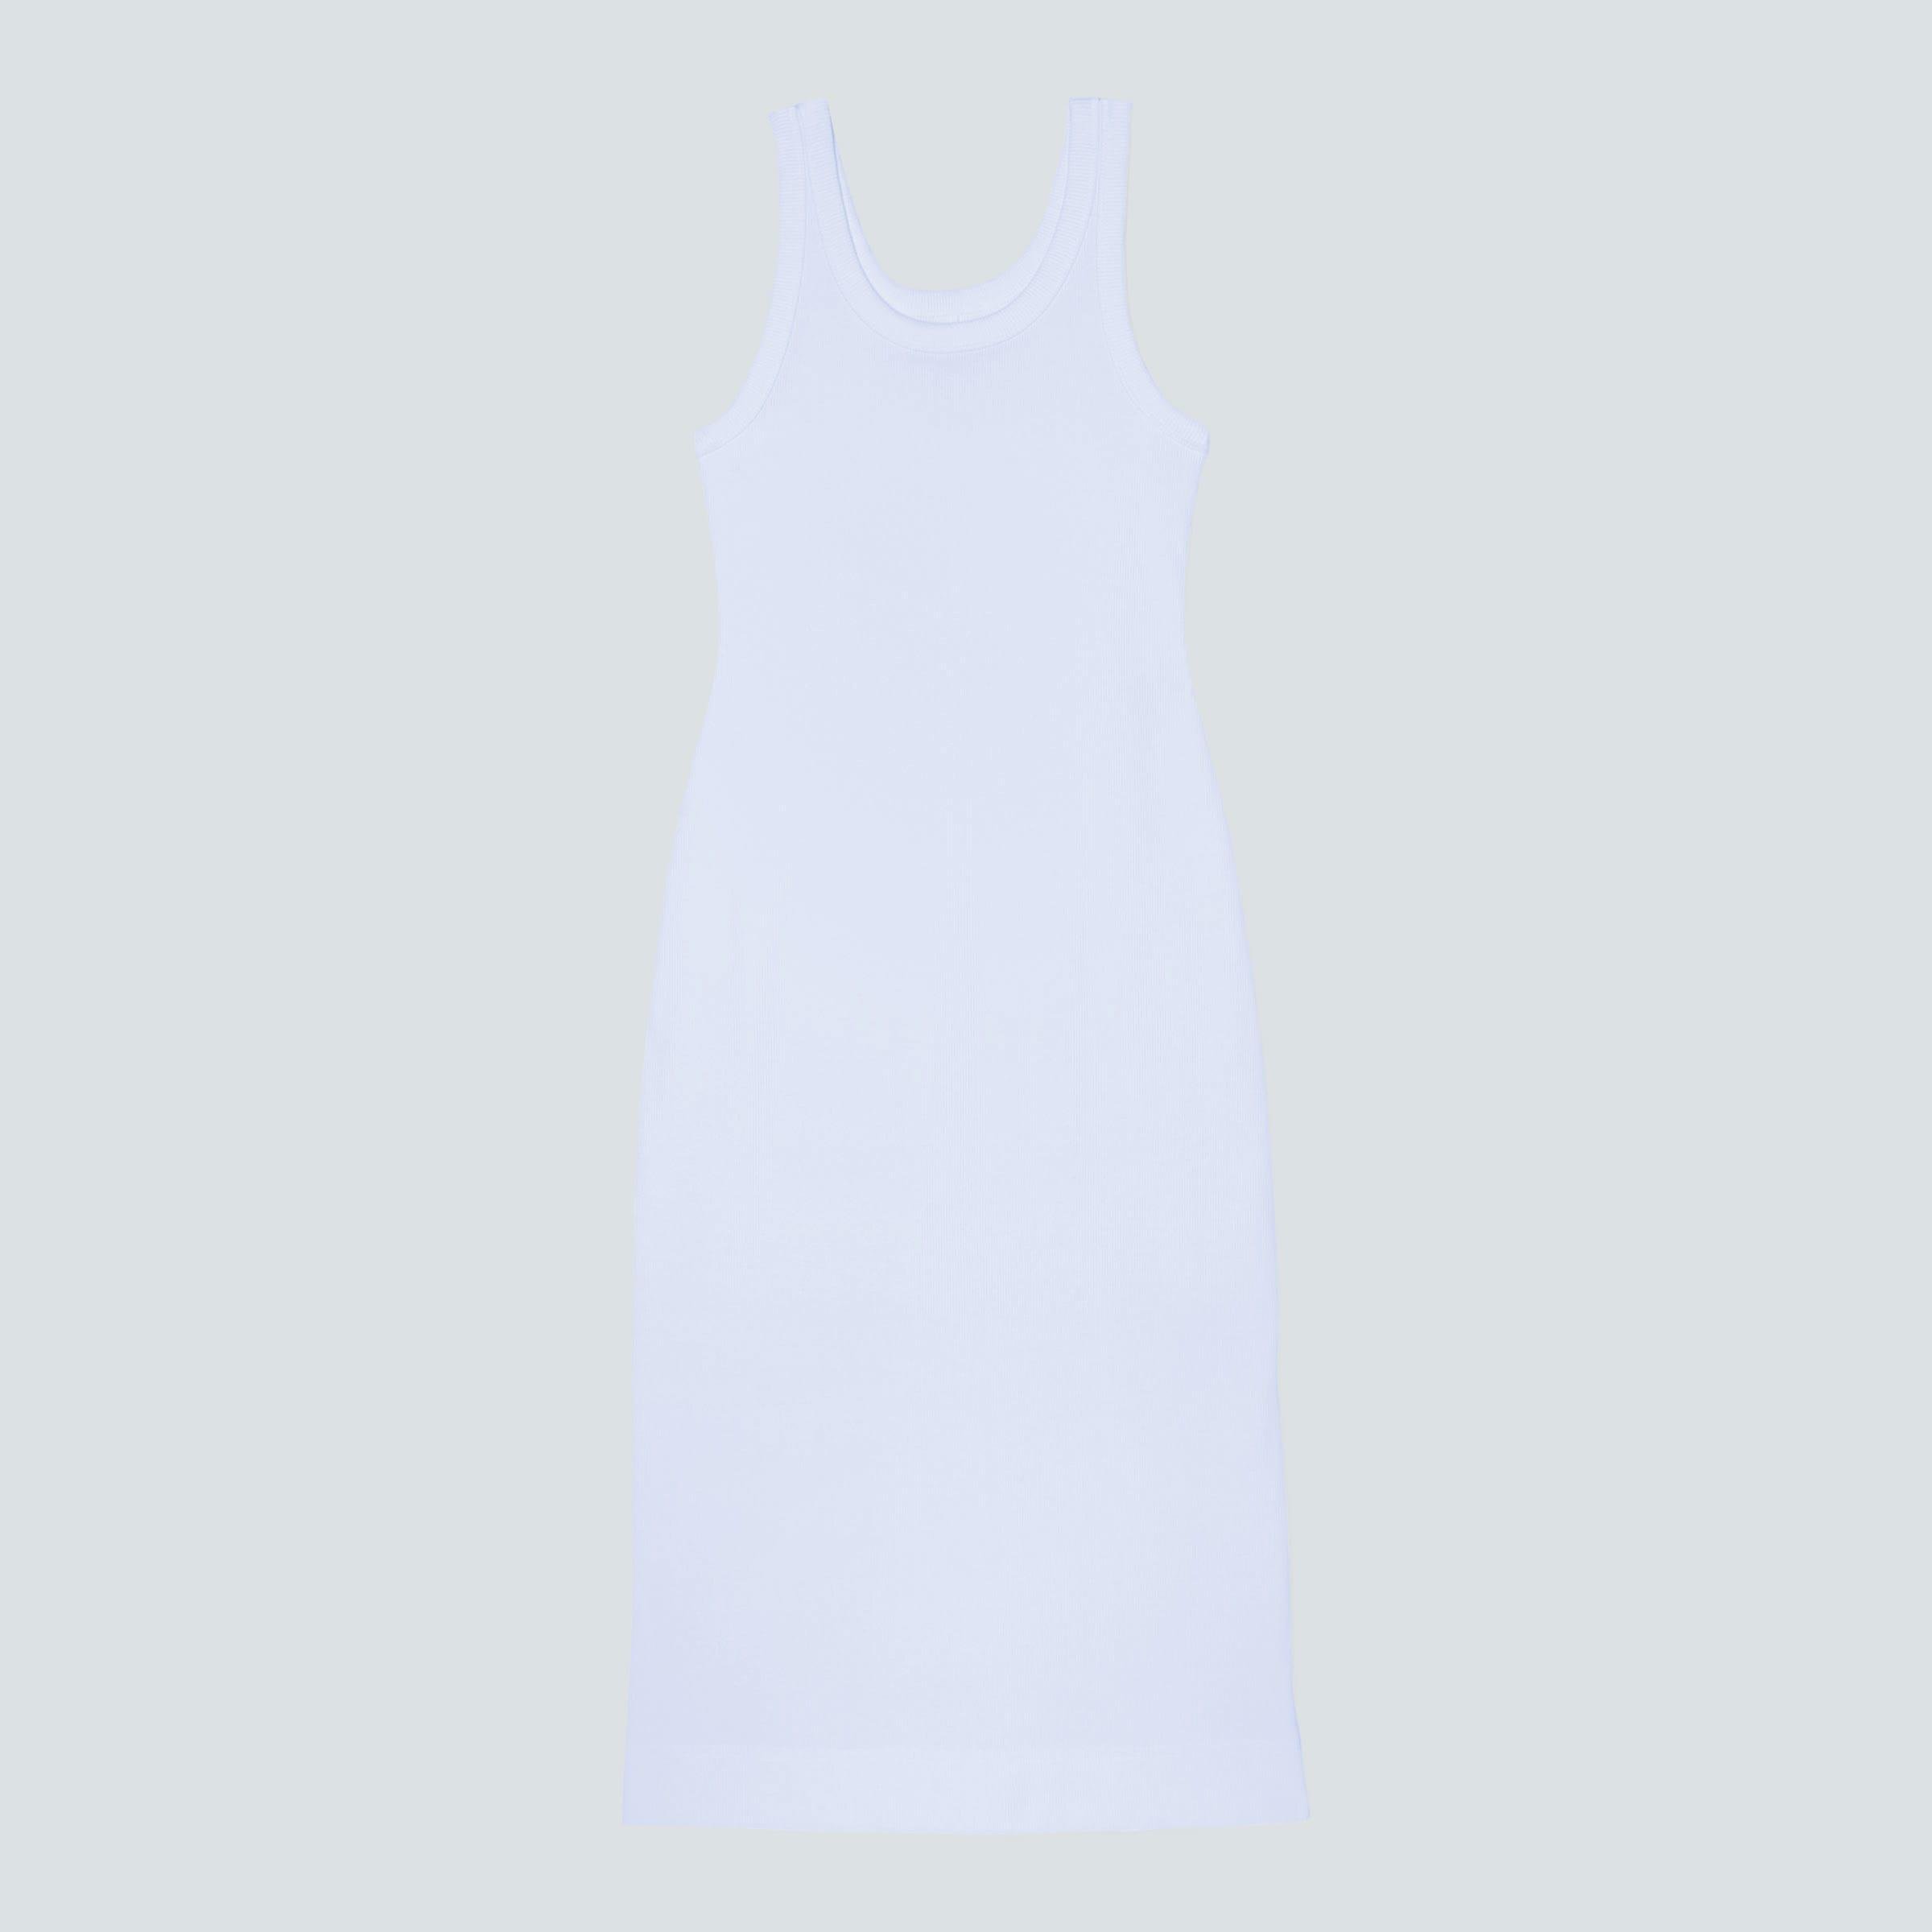 The Ribbed Tank Dress by EVERLANE